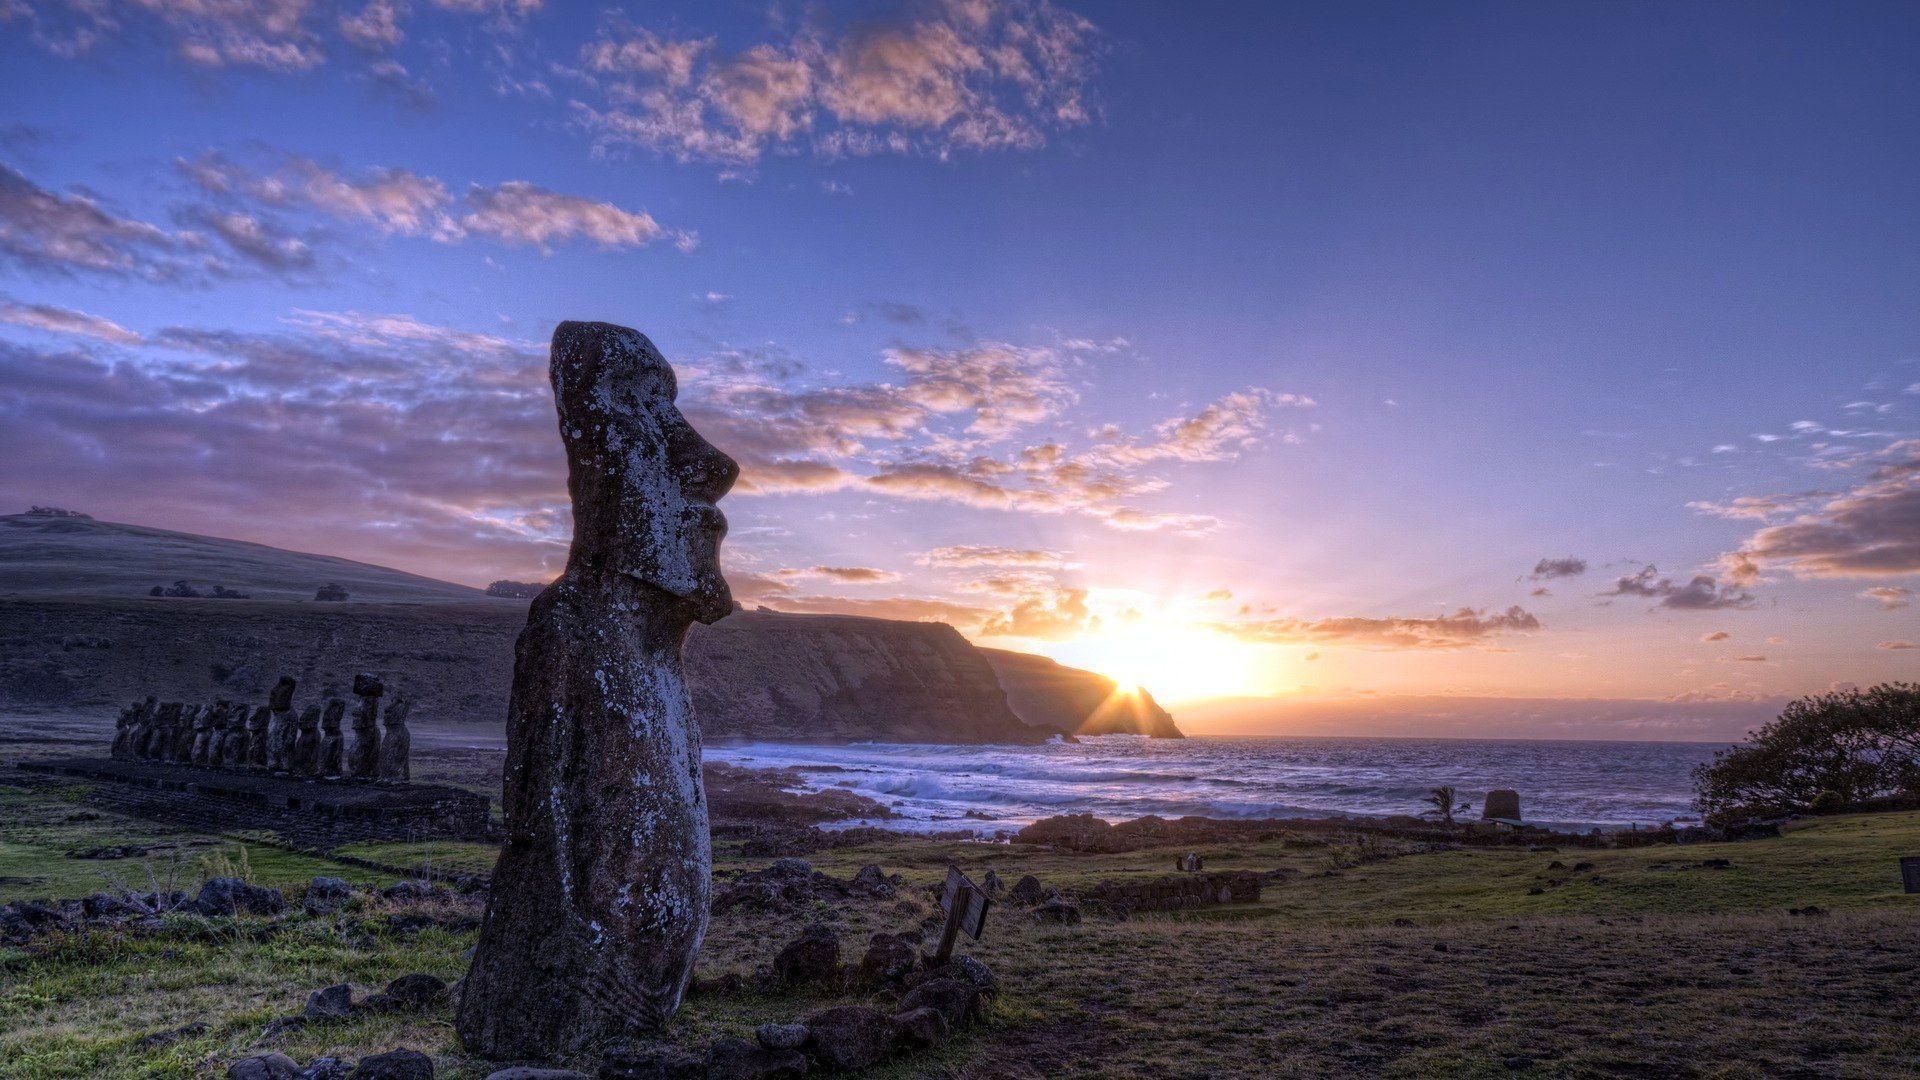 Chile: Easter Island, Rapa Nui National Park, Outdoors. 1920x1080 Full HD Wallpaper.